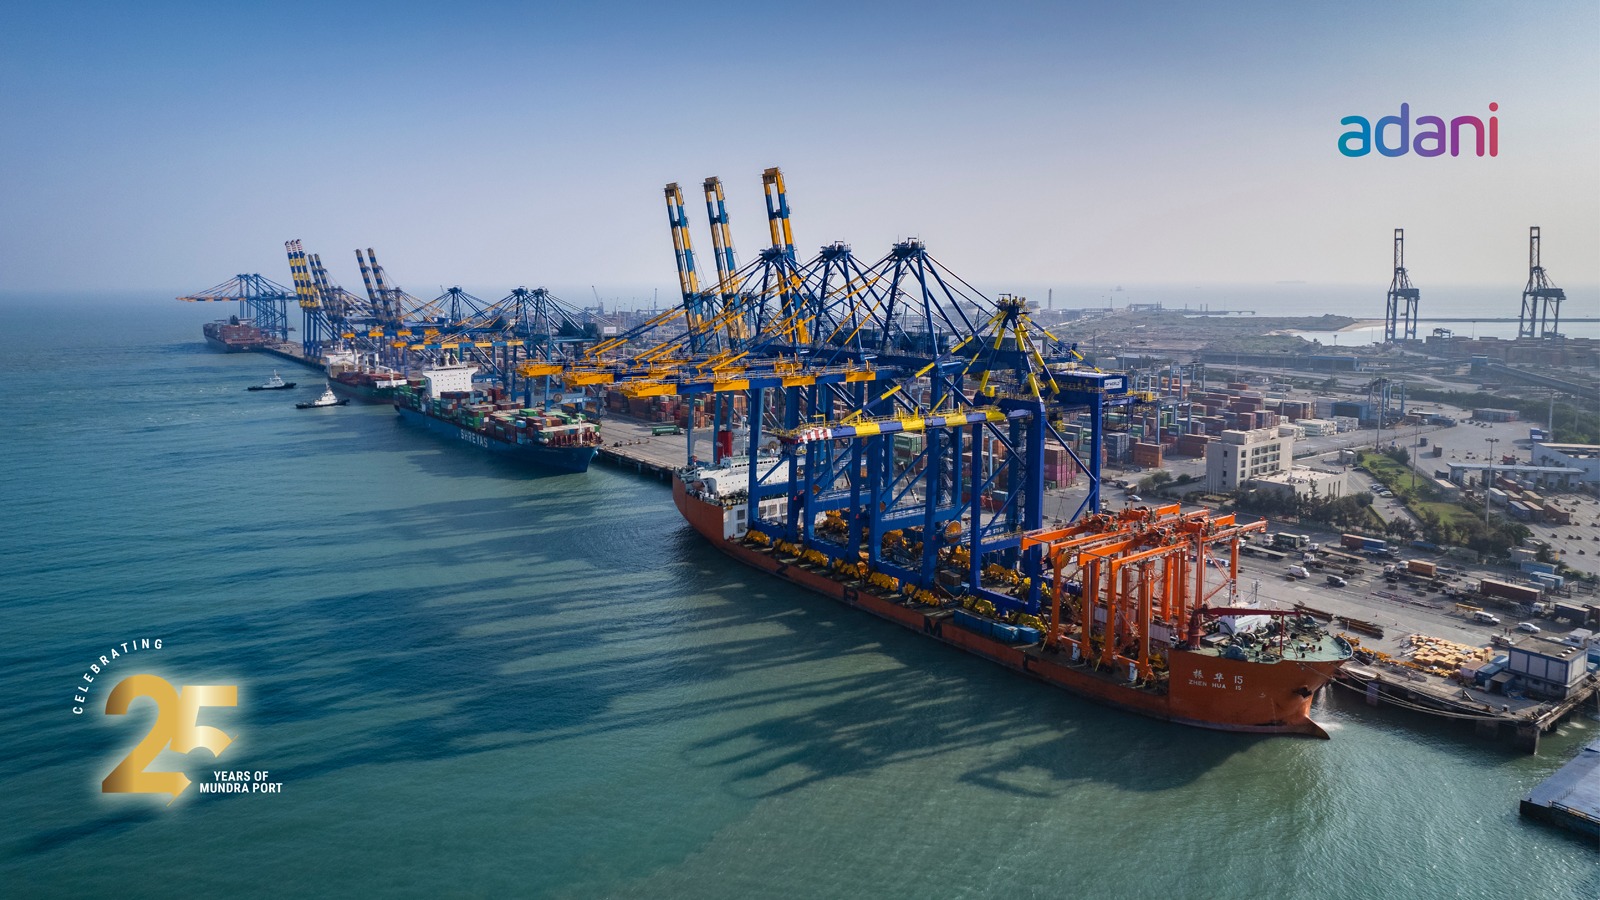 Mundra Port celebrates 25 years of stellar  operations and unparalleled growth